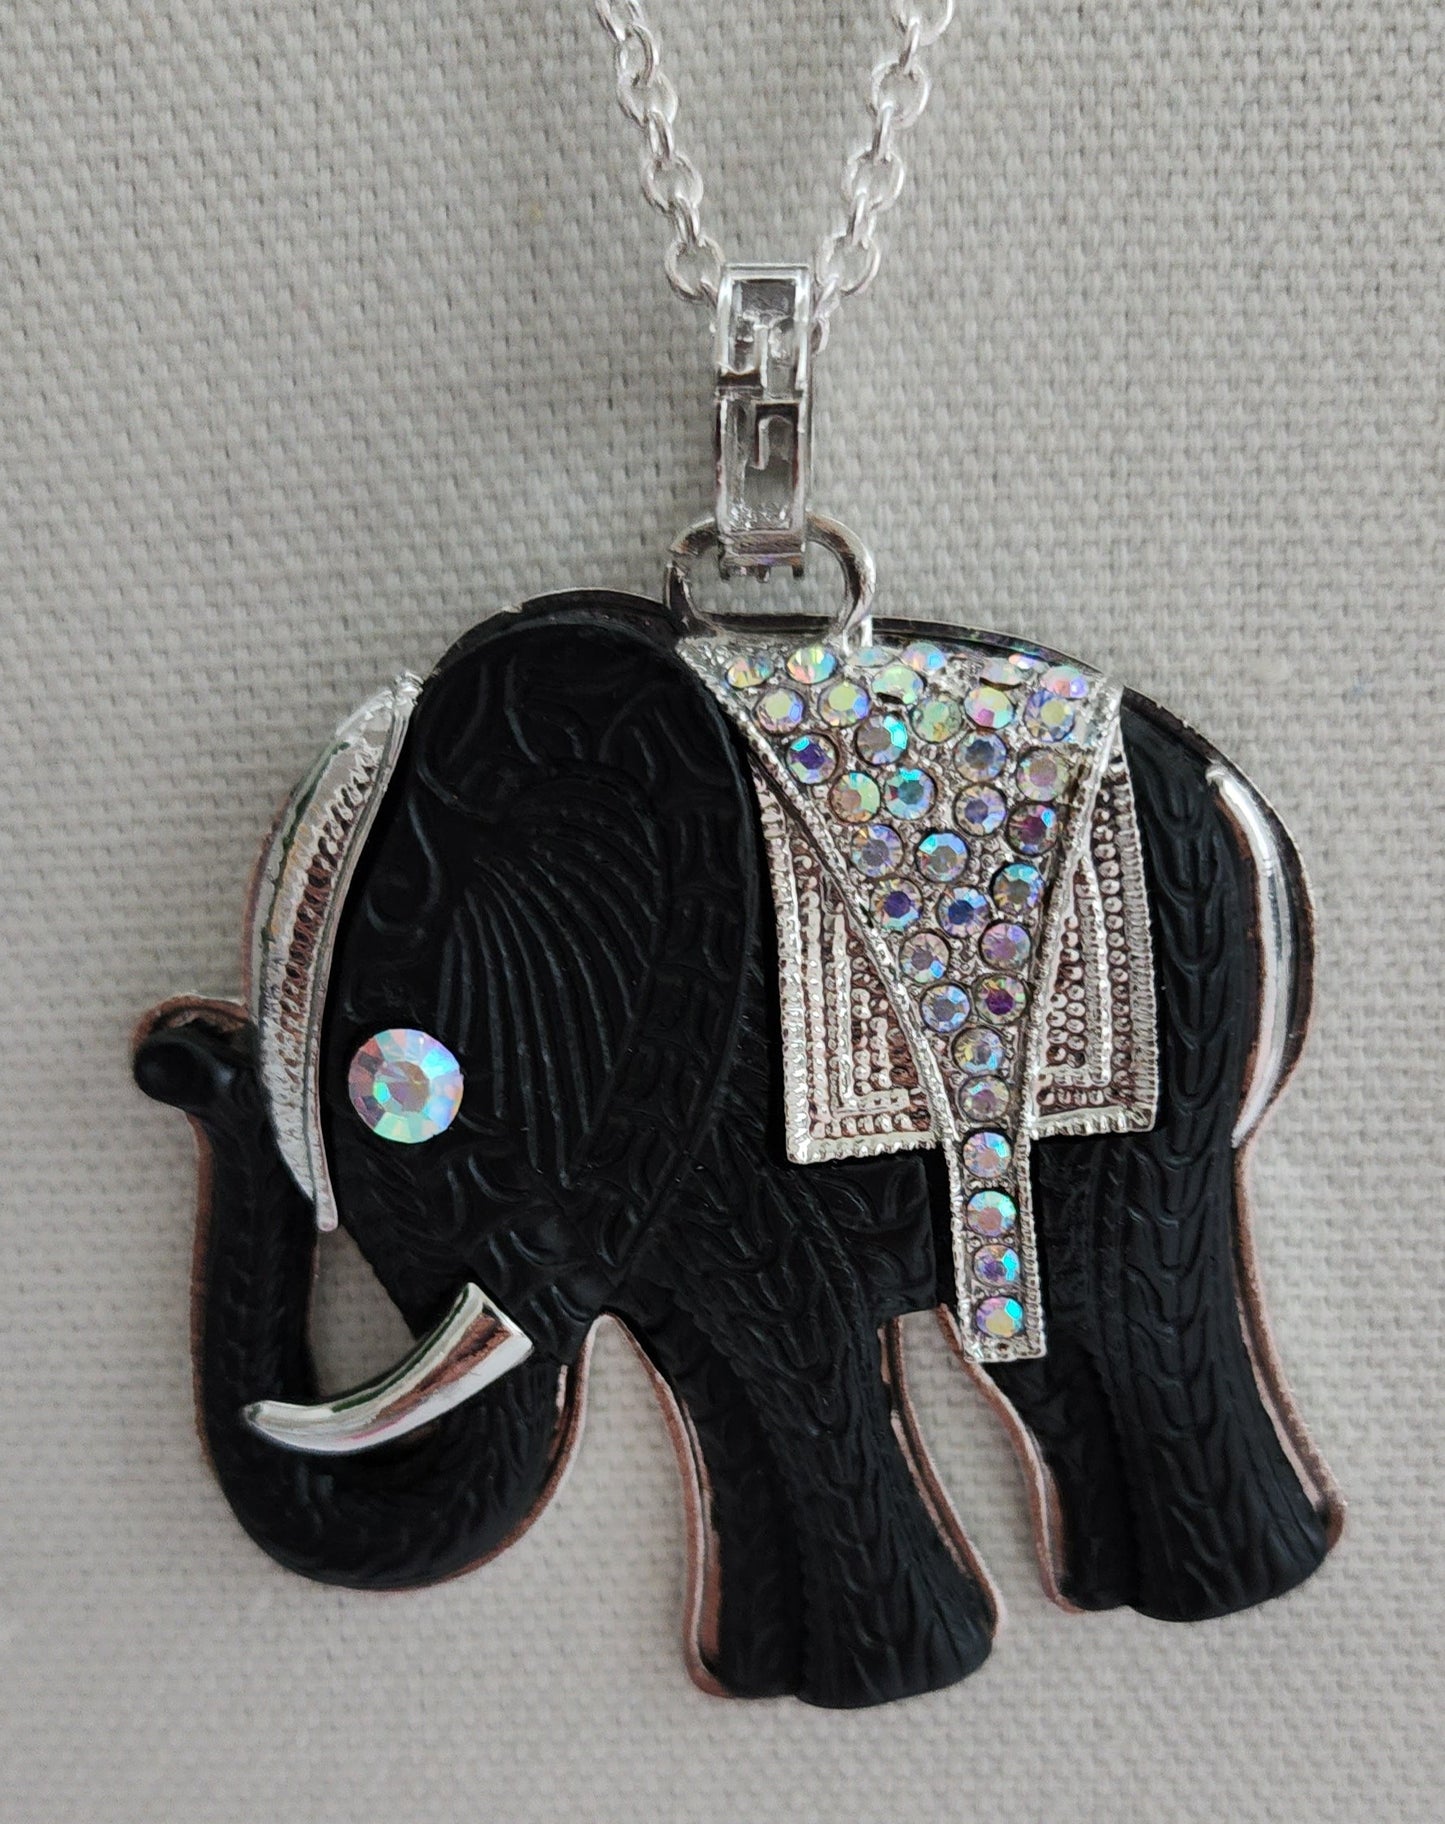 Lucky 3 Necklace Silver Chain with Elephants and Khamsa.